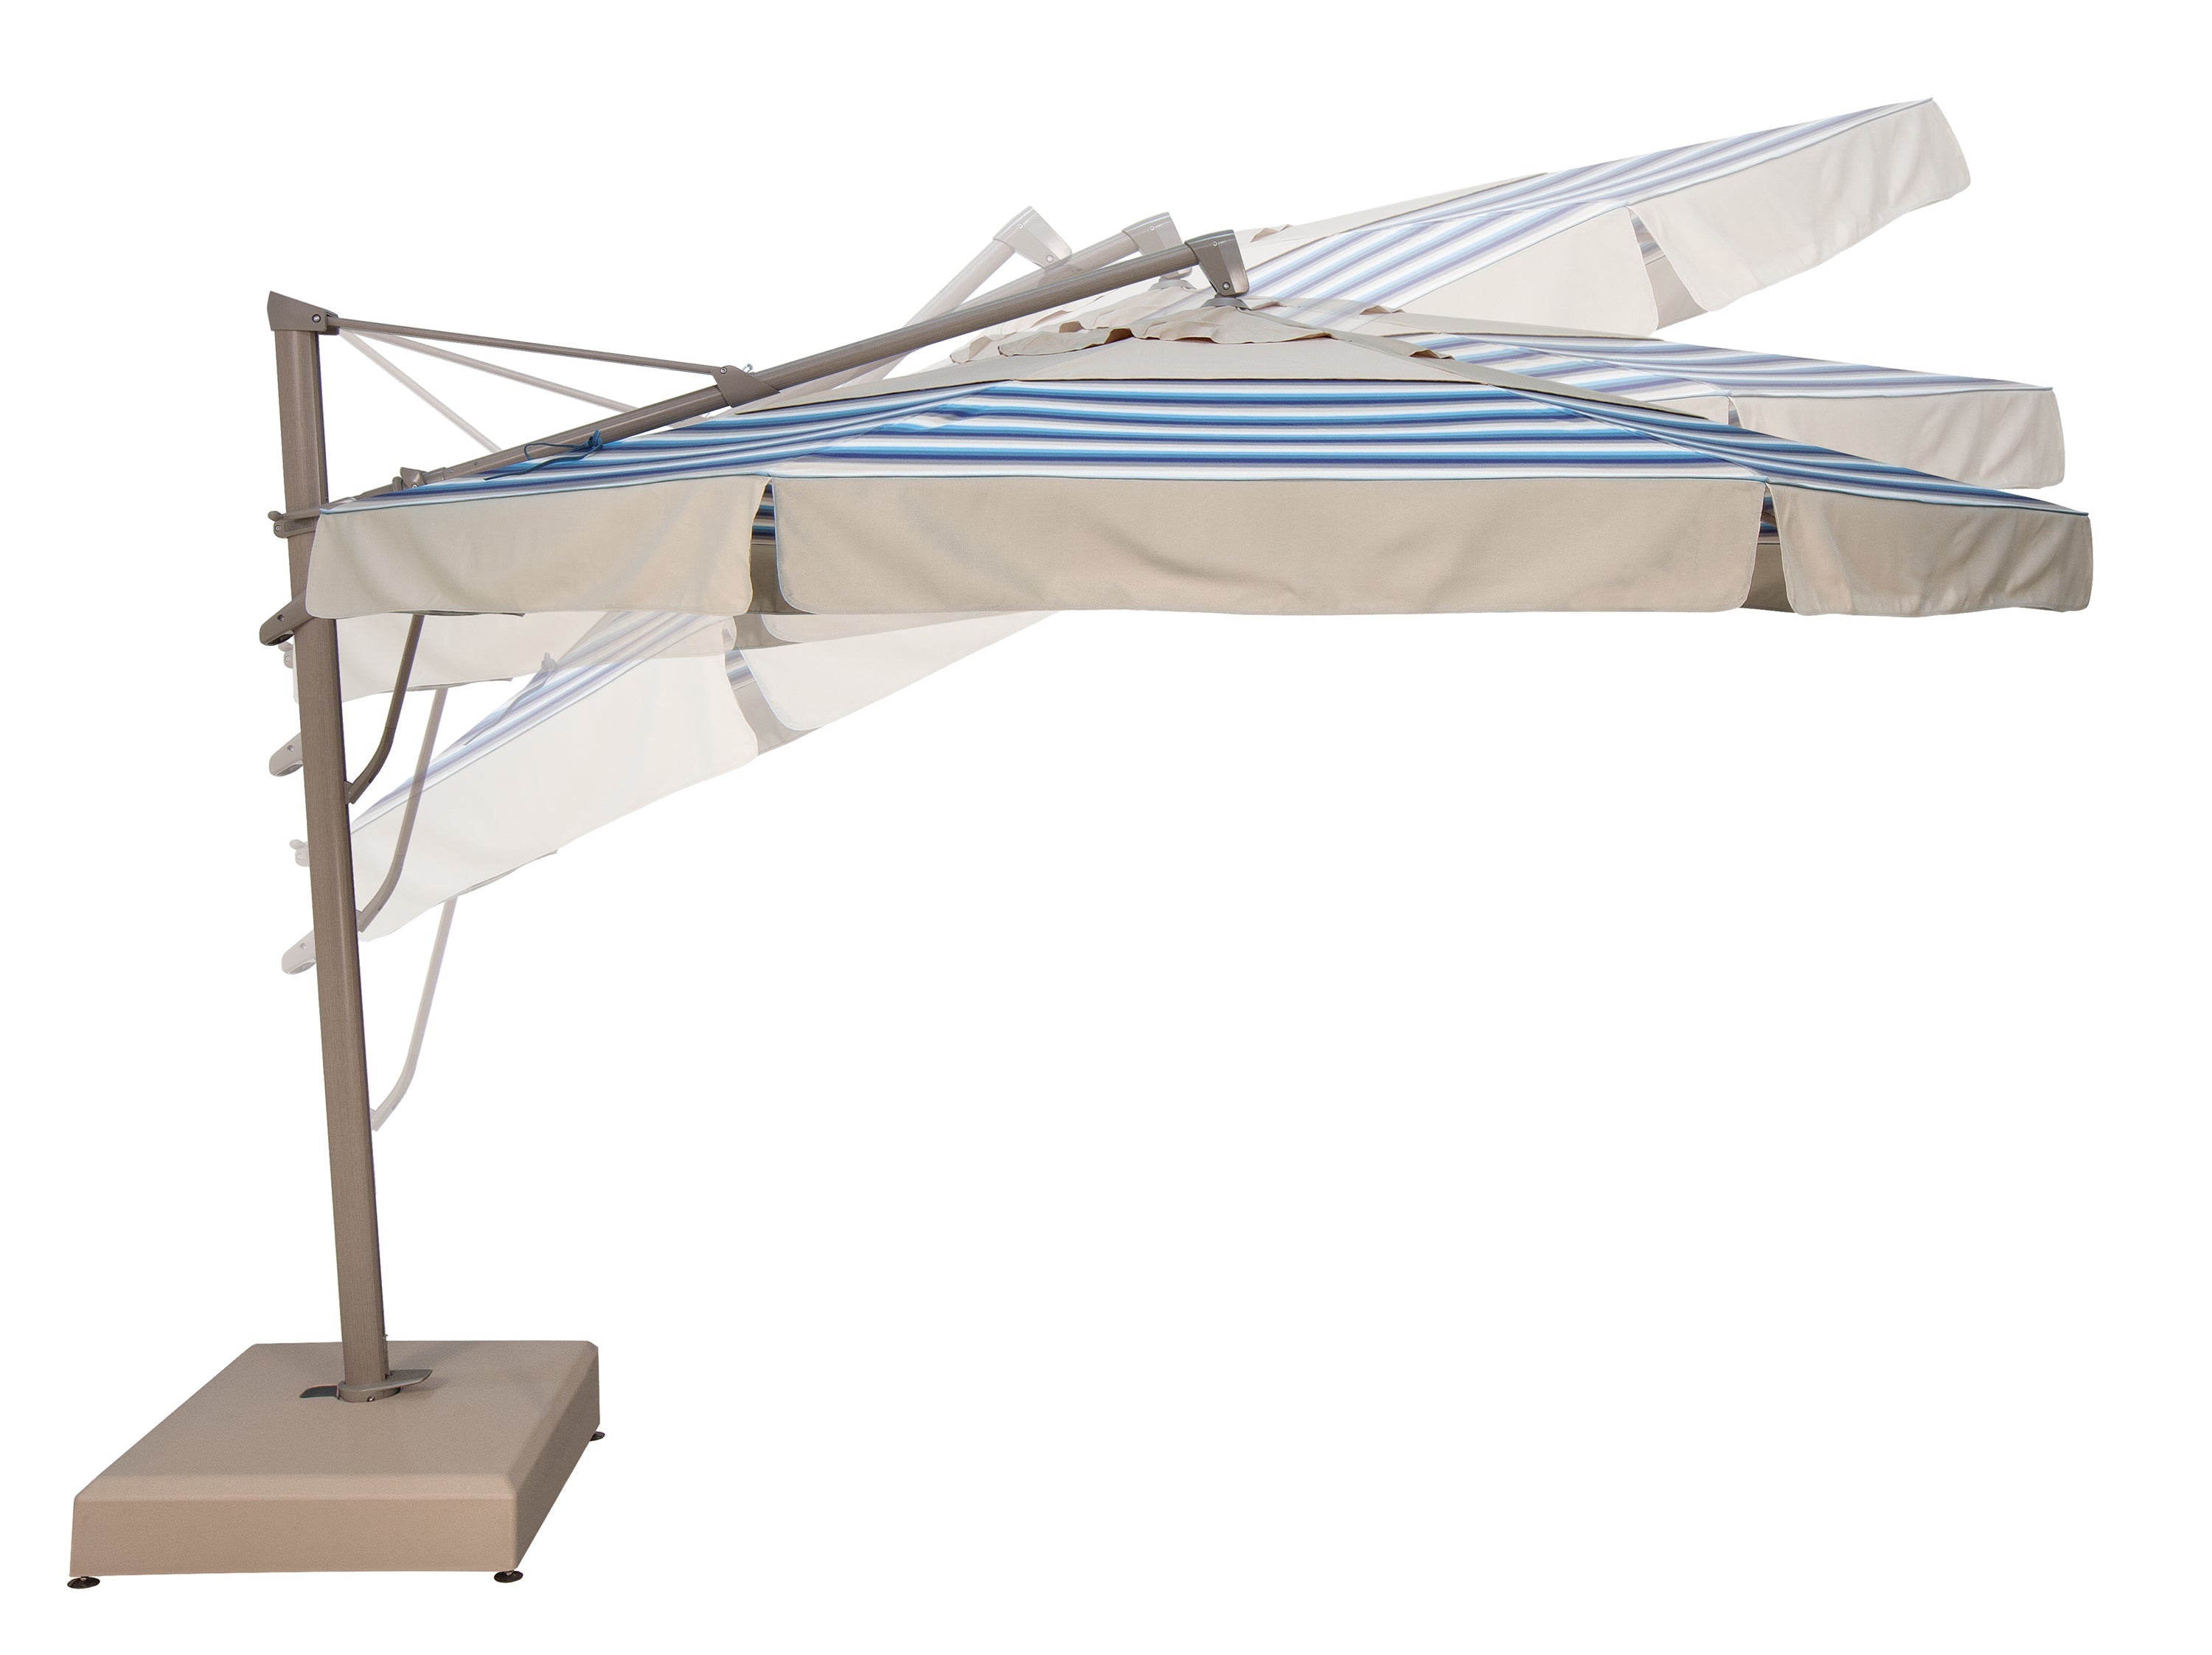 13' AKZ PLUS - Octagonal Cantilever Umbrella With Valance